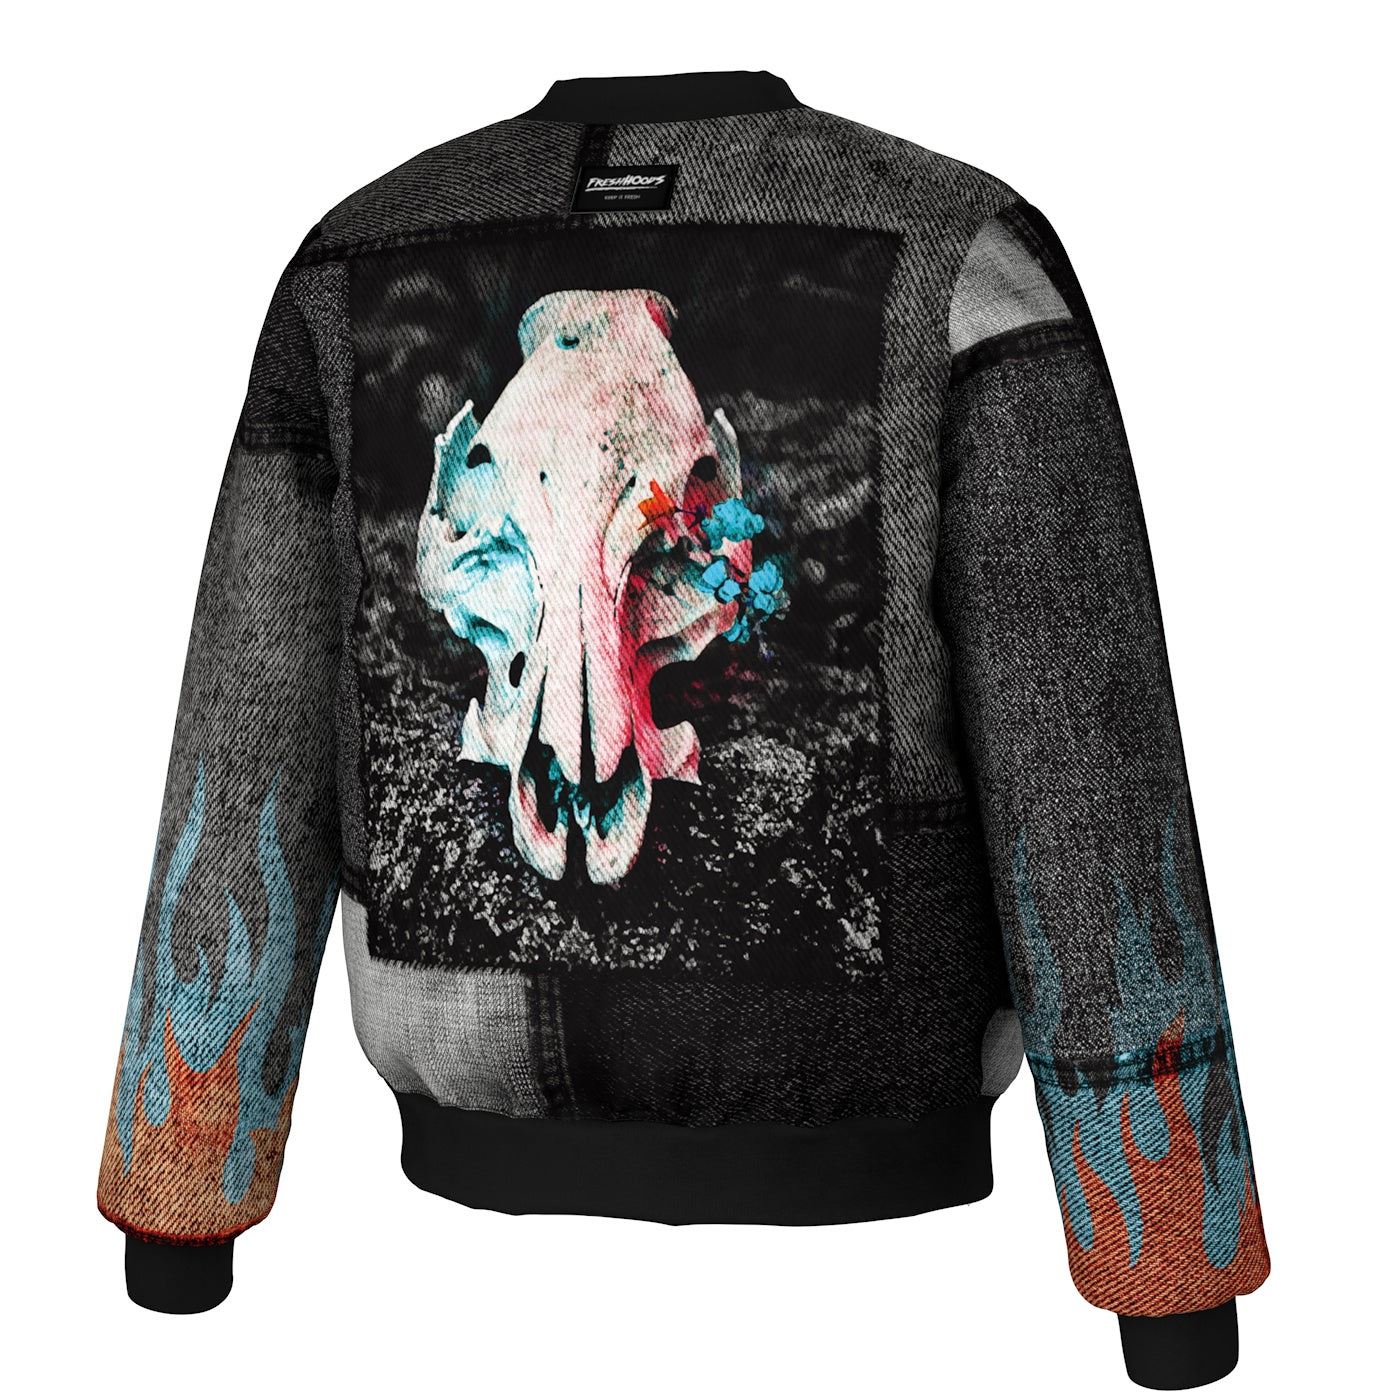 Patched Path Bomber Jacket